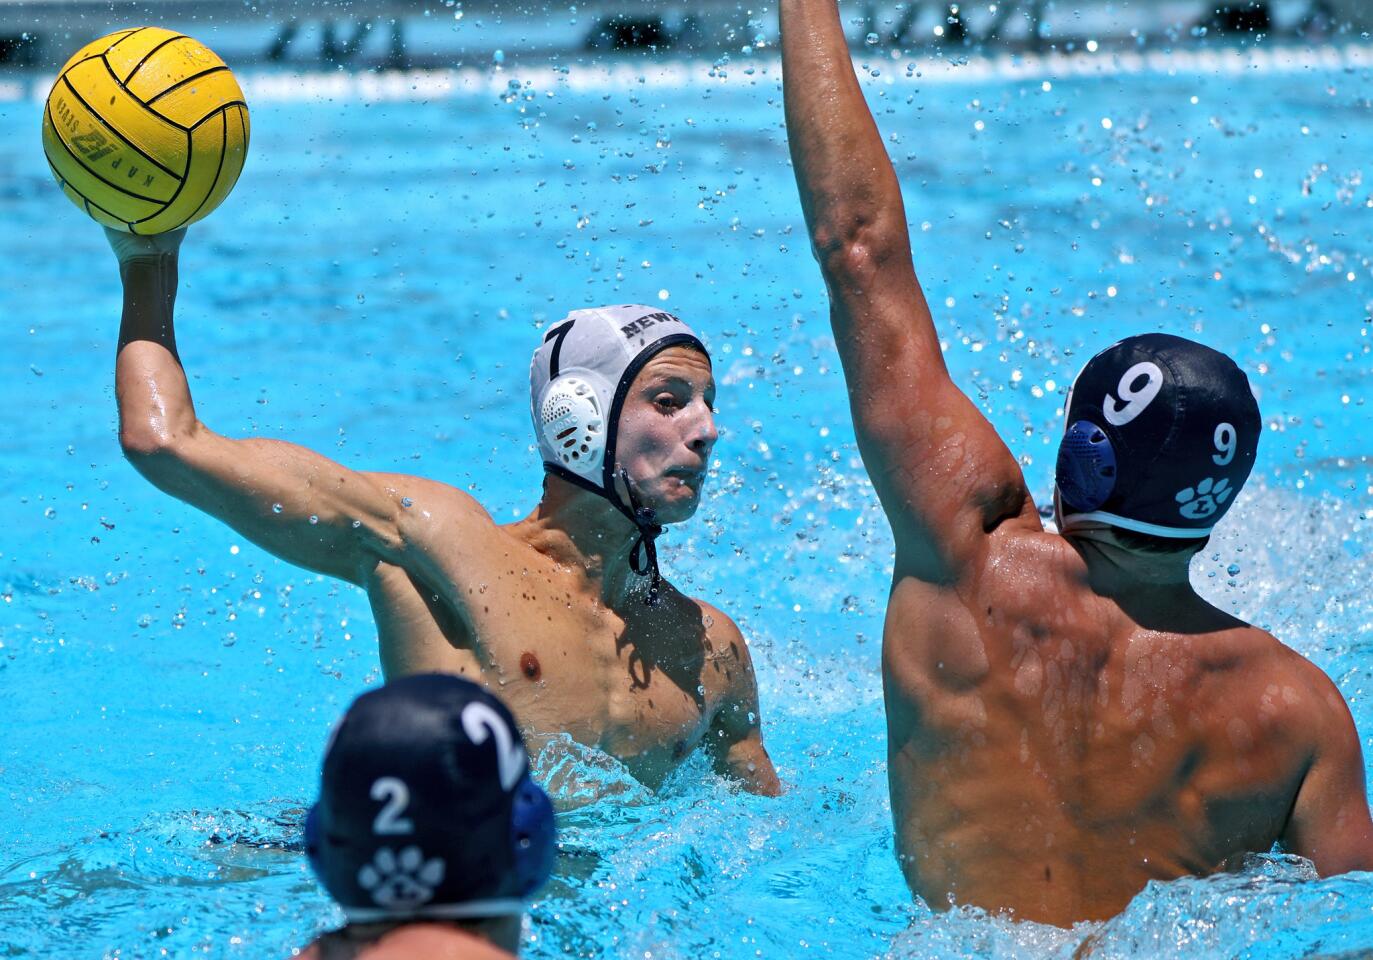 Newport Harbor High School water polo player Mason Hunt scores over the outstretched arms of Carson Kranz, right, in the championship game vs. Los Angeles Loyola at the Summer S & R Elite 8 Tournament at Harvard-Westlake High School, in Studio City on Saturday, July 13, 2019. Newport won 10-6.